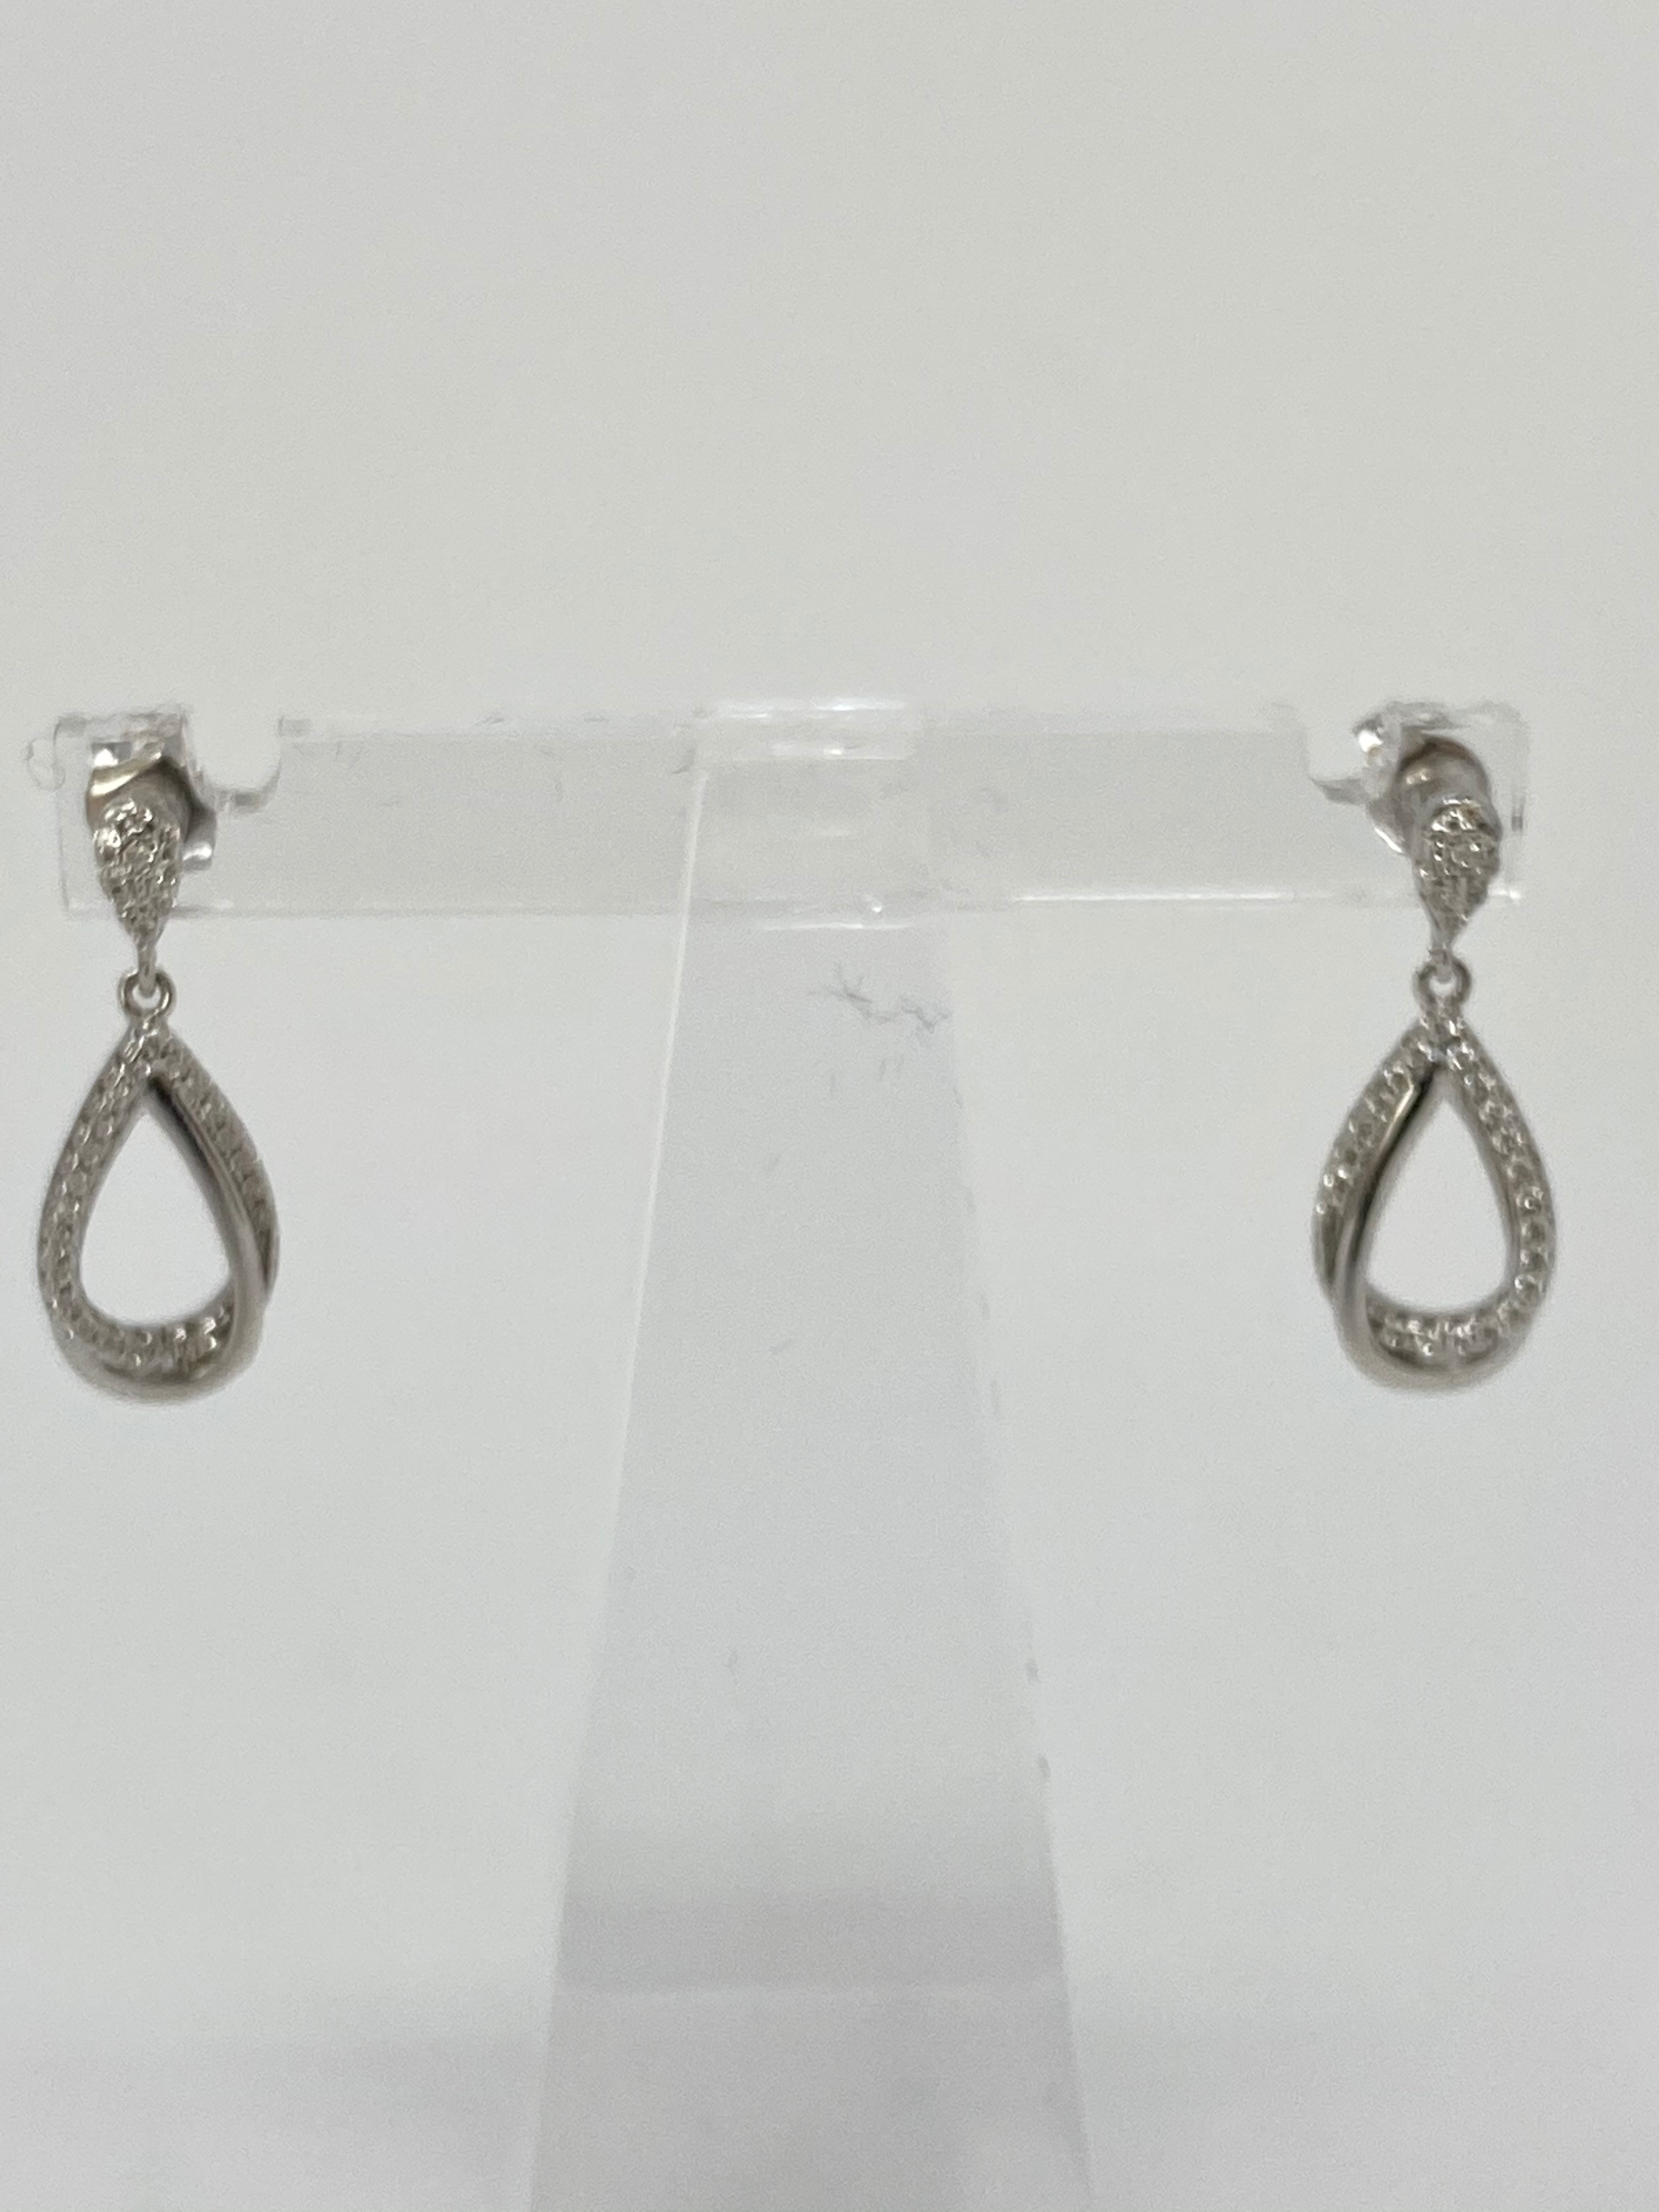 Silver and Cubic Zirconia Earrings